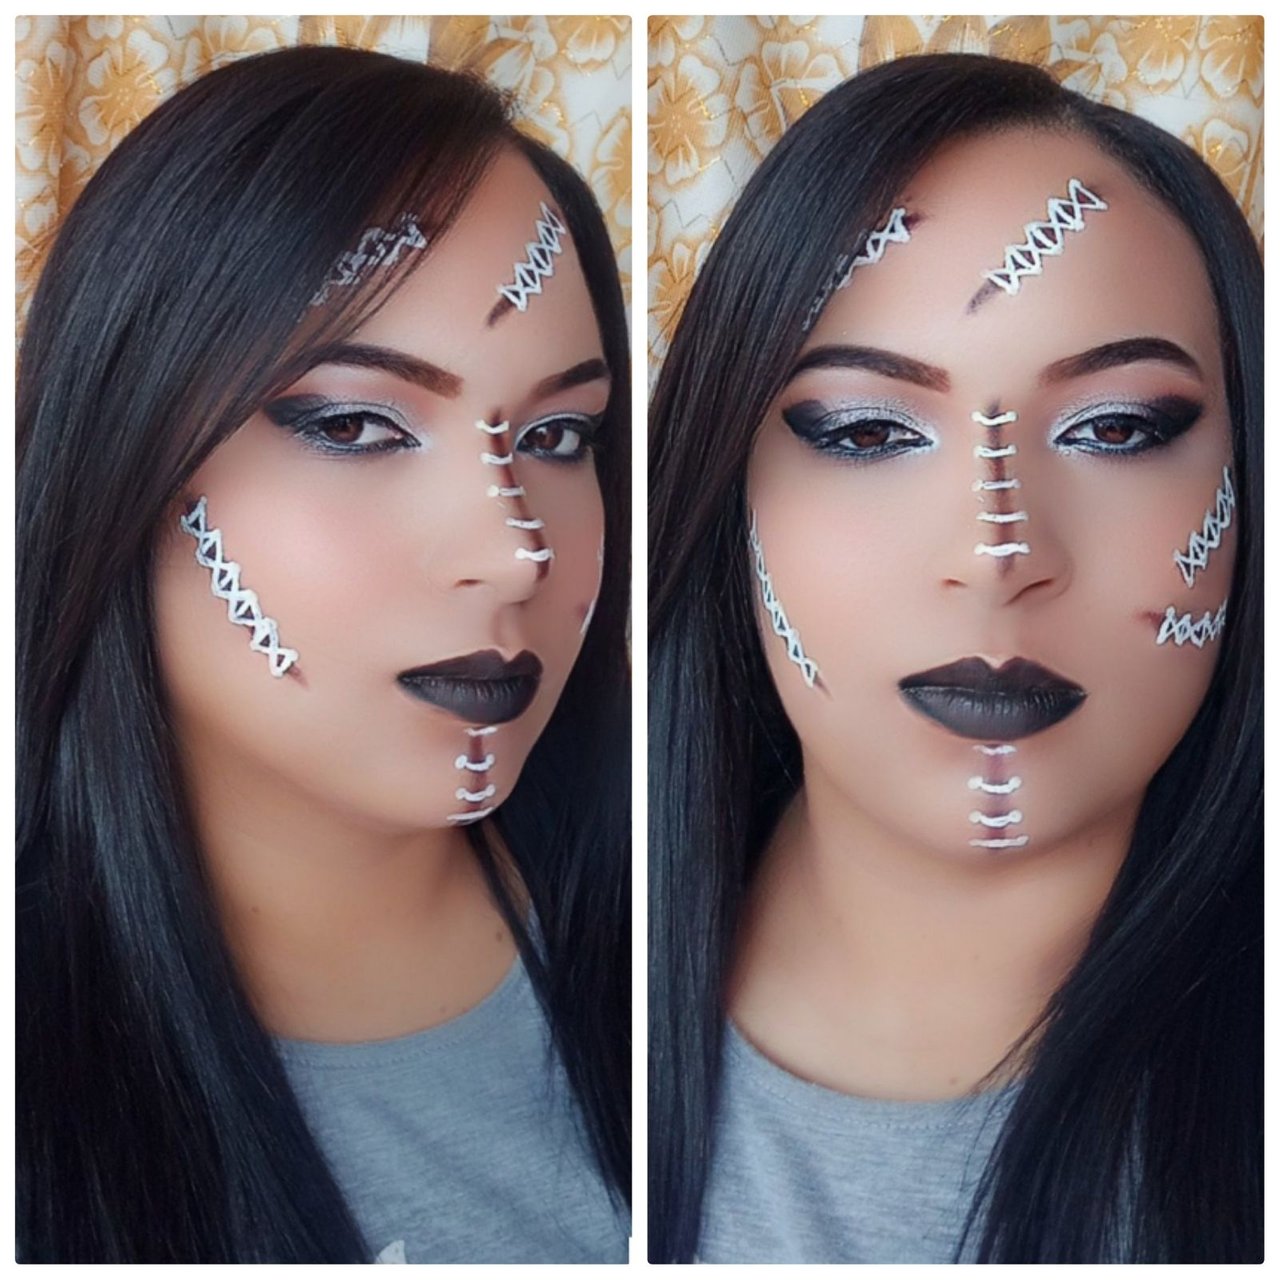 Maquillaje inspirado en cicatrices / Makeup inspired by scars. | PeakD